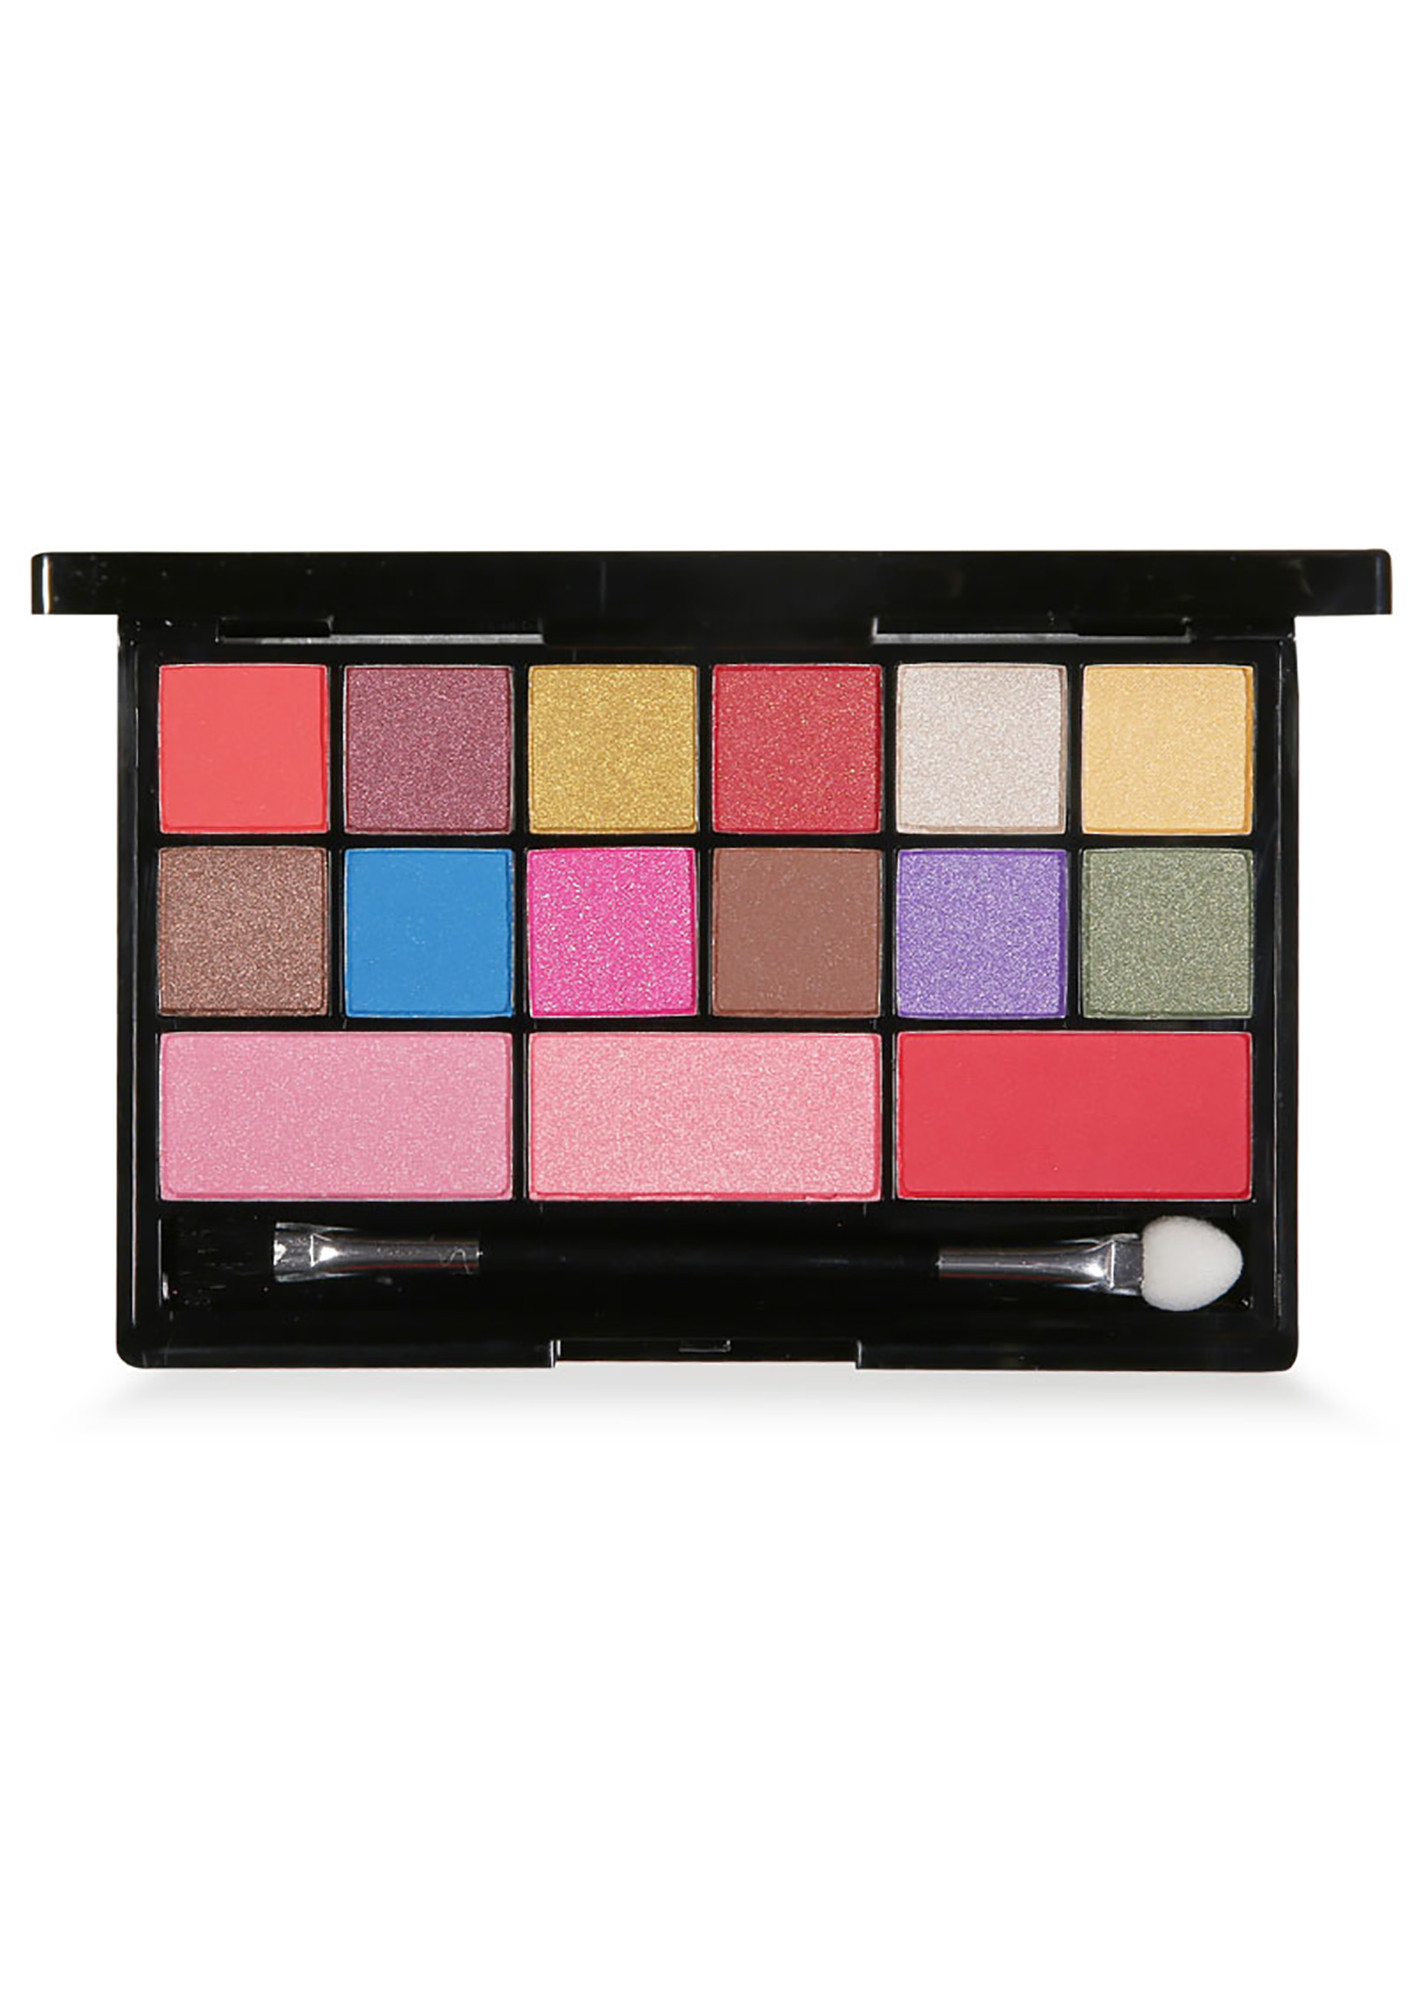 NYX Professional Makeup Official Site - Makeup & Beauty Products